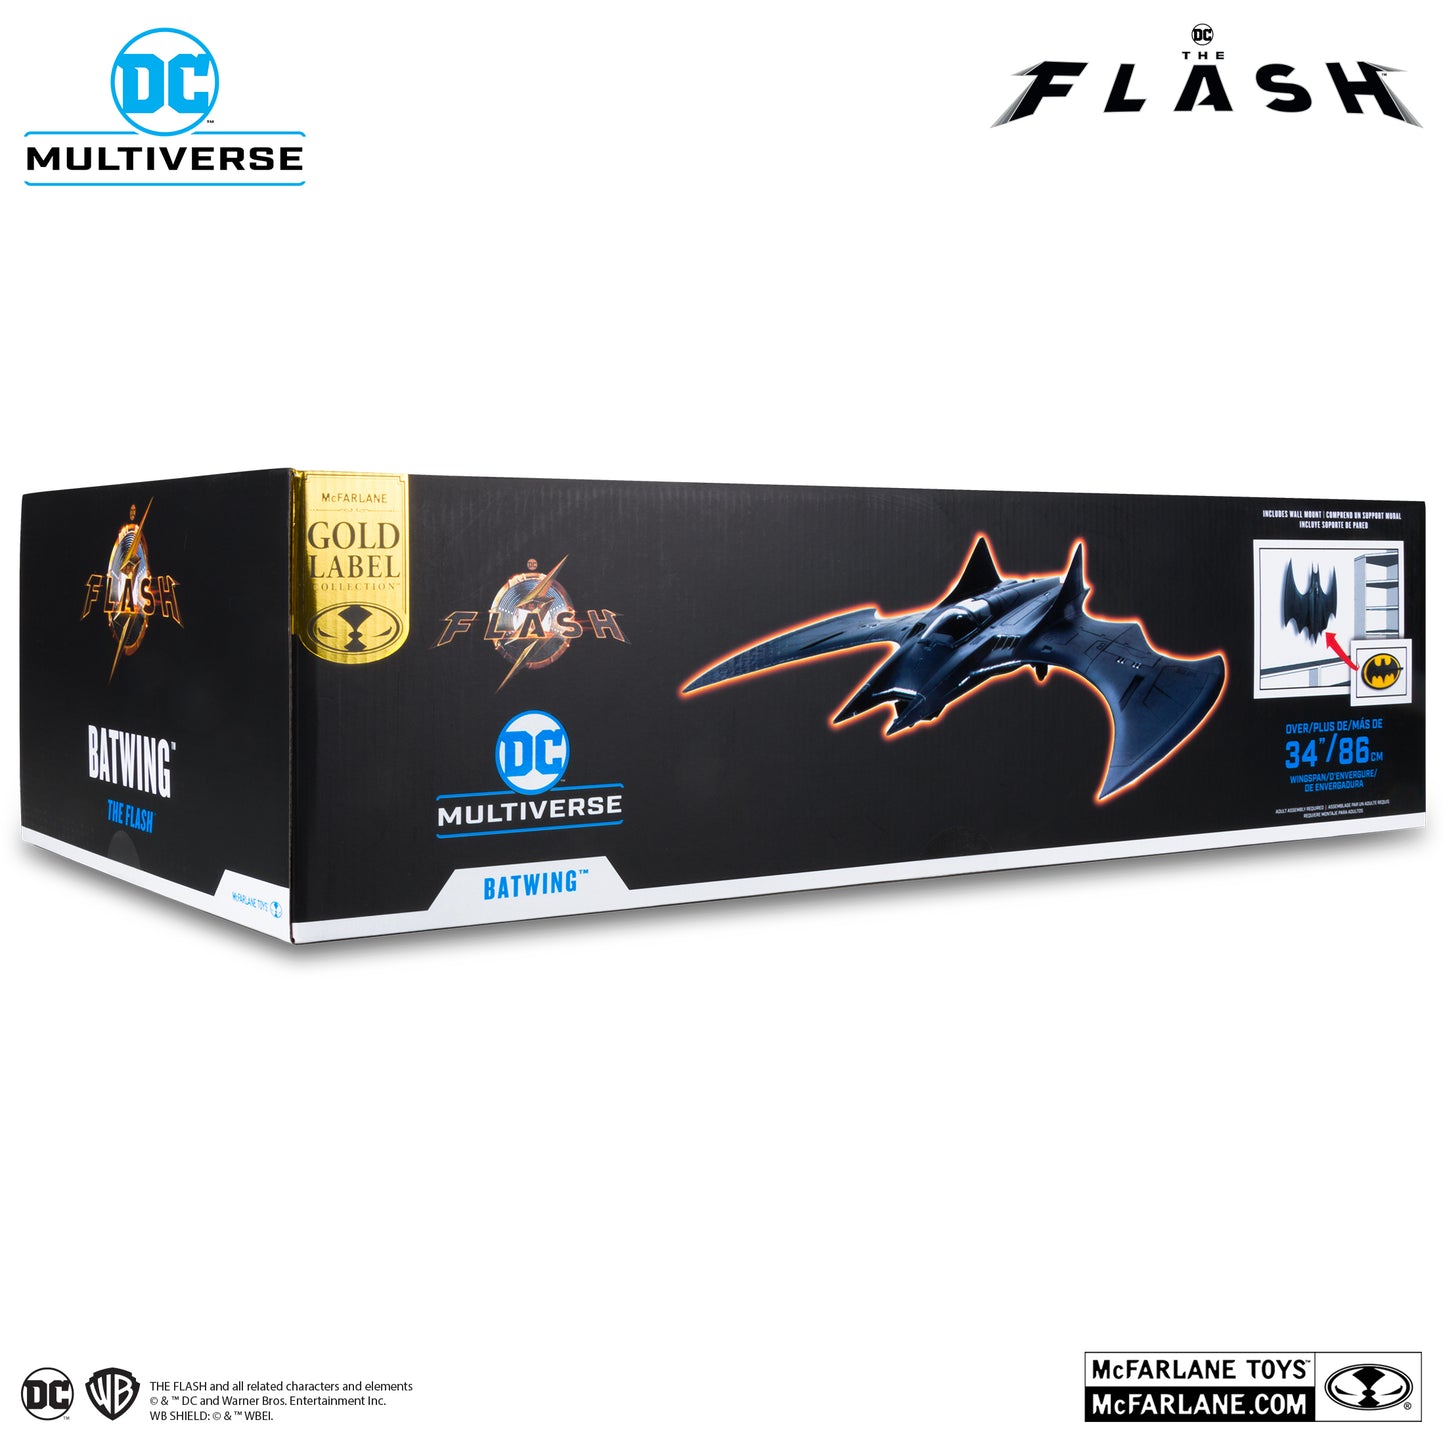 BATWING (GOLD LABEL) (THE FLASH MOVIE) in a box front view - Heretoserveyou